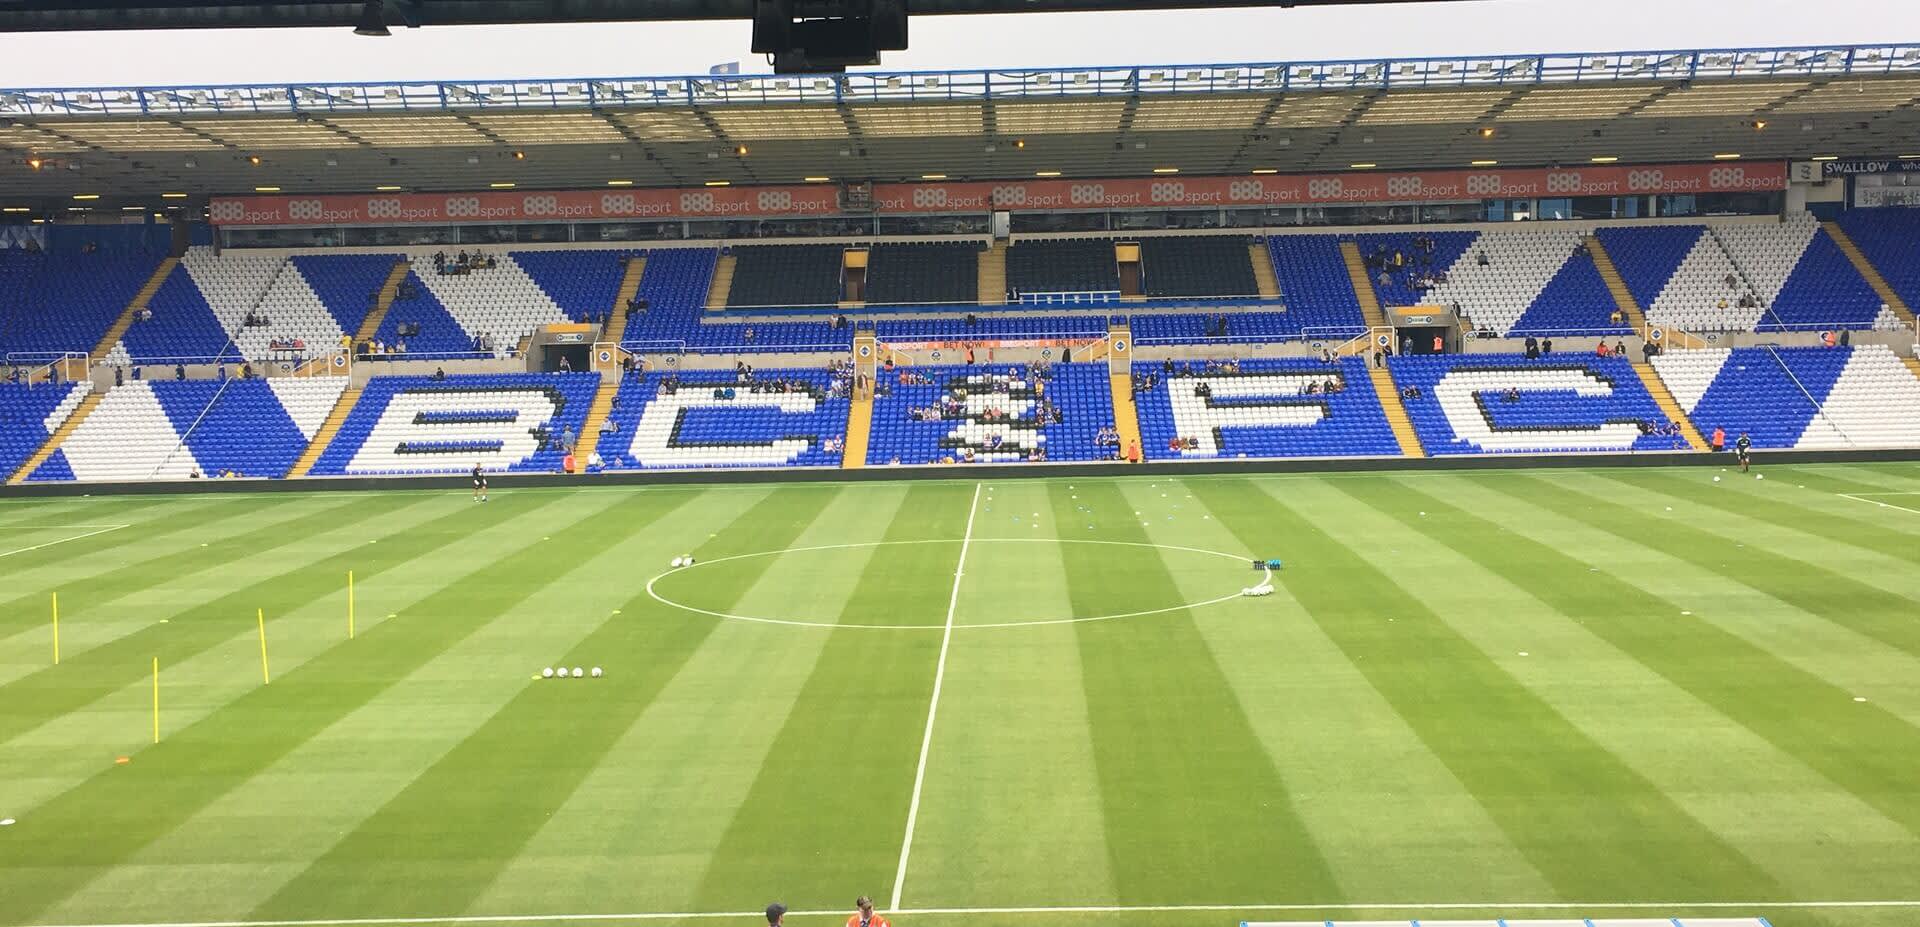 The field and stands at Birmingham City Football Club